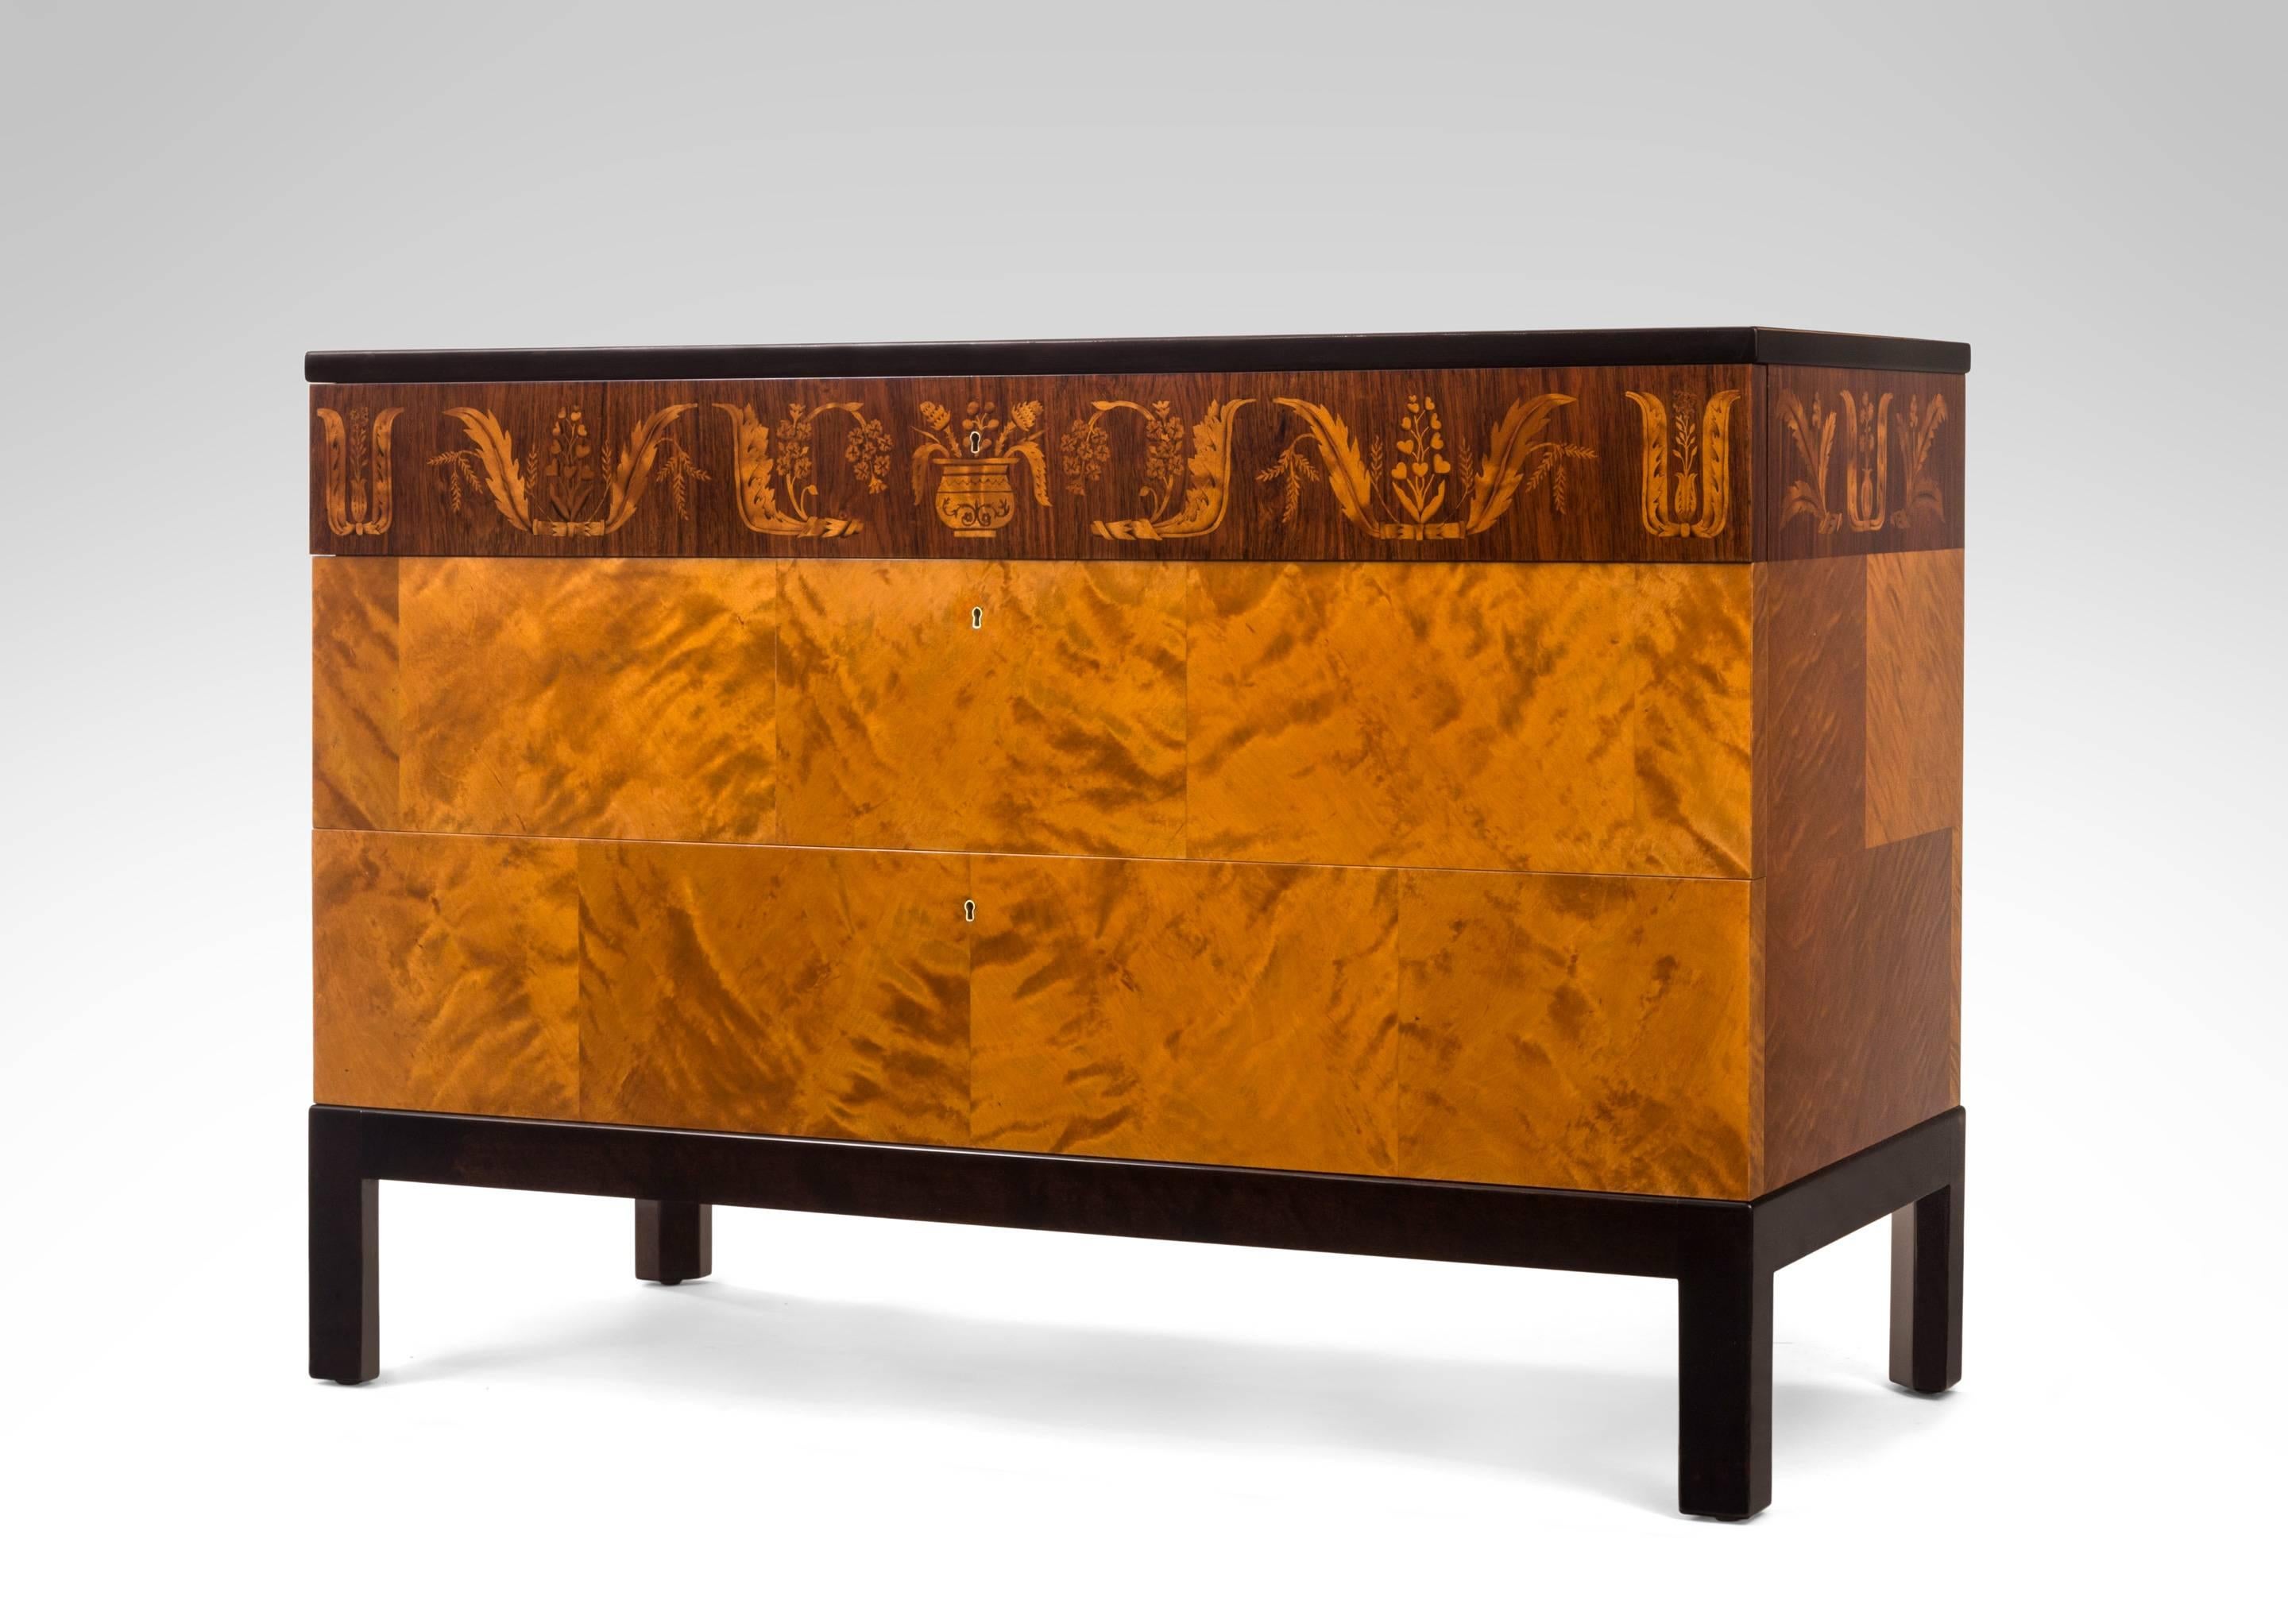 The rectangular figured birch top, above an inlaid rosewood frieze drawer and two figured birch drawers, on an ebonized base with square legs.